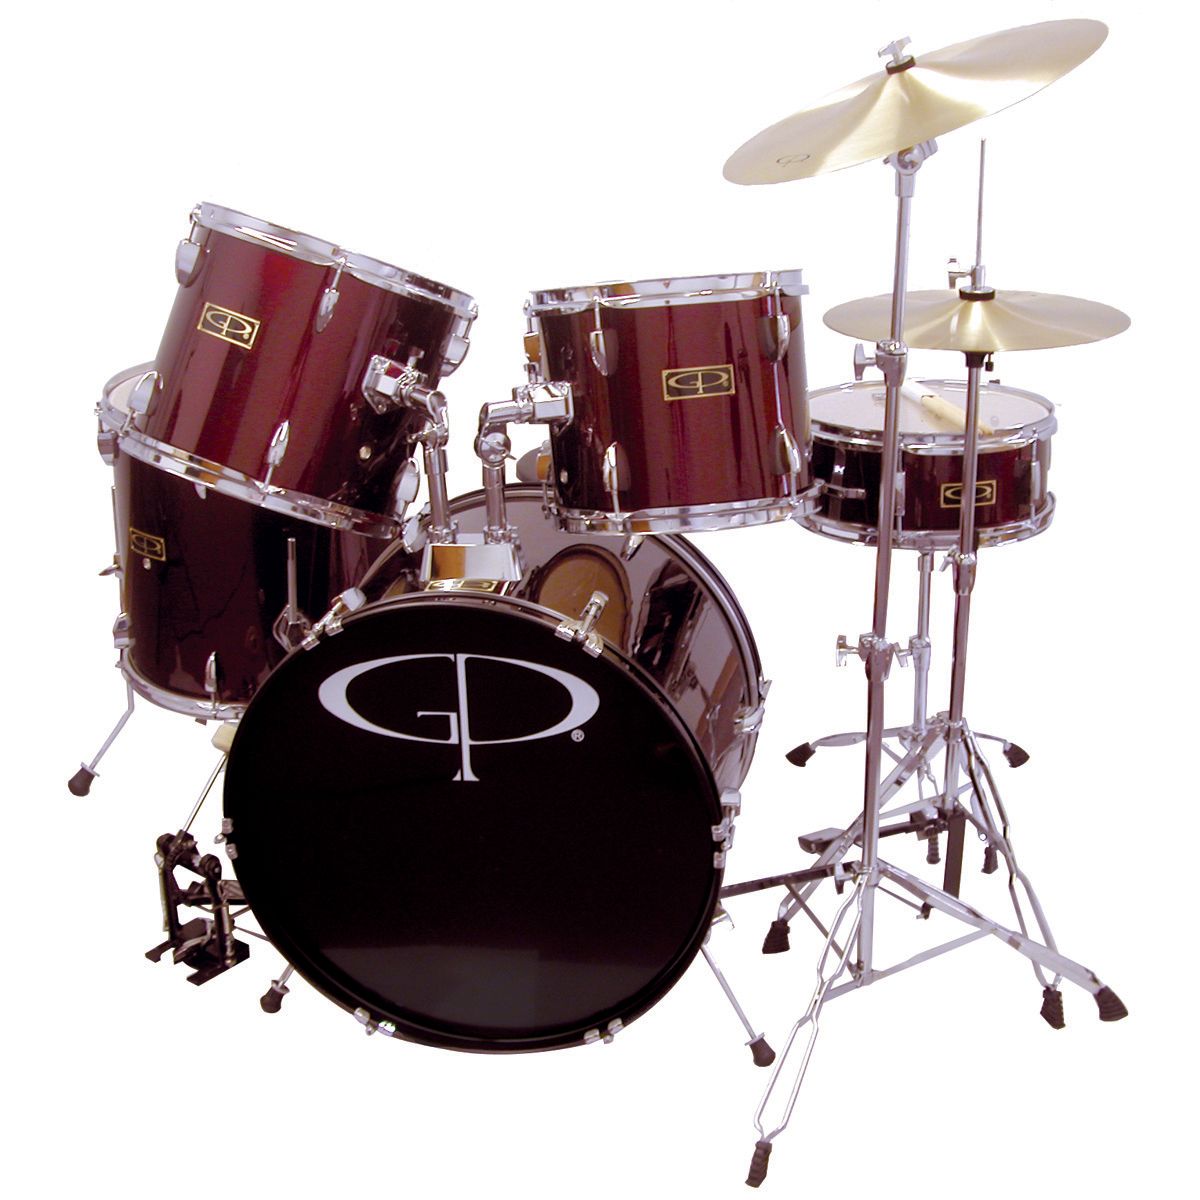 5-Piece Complete Drum Set with Accs in Wine Red